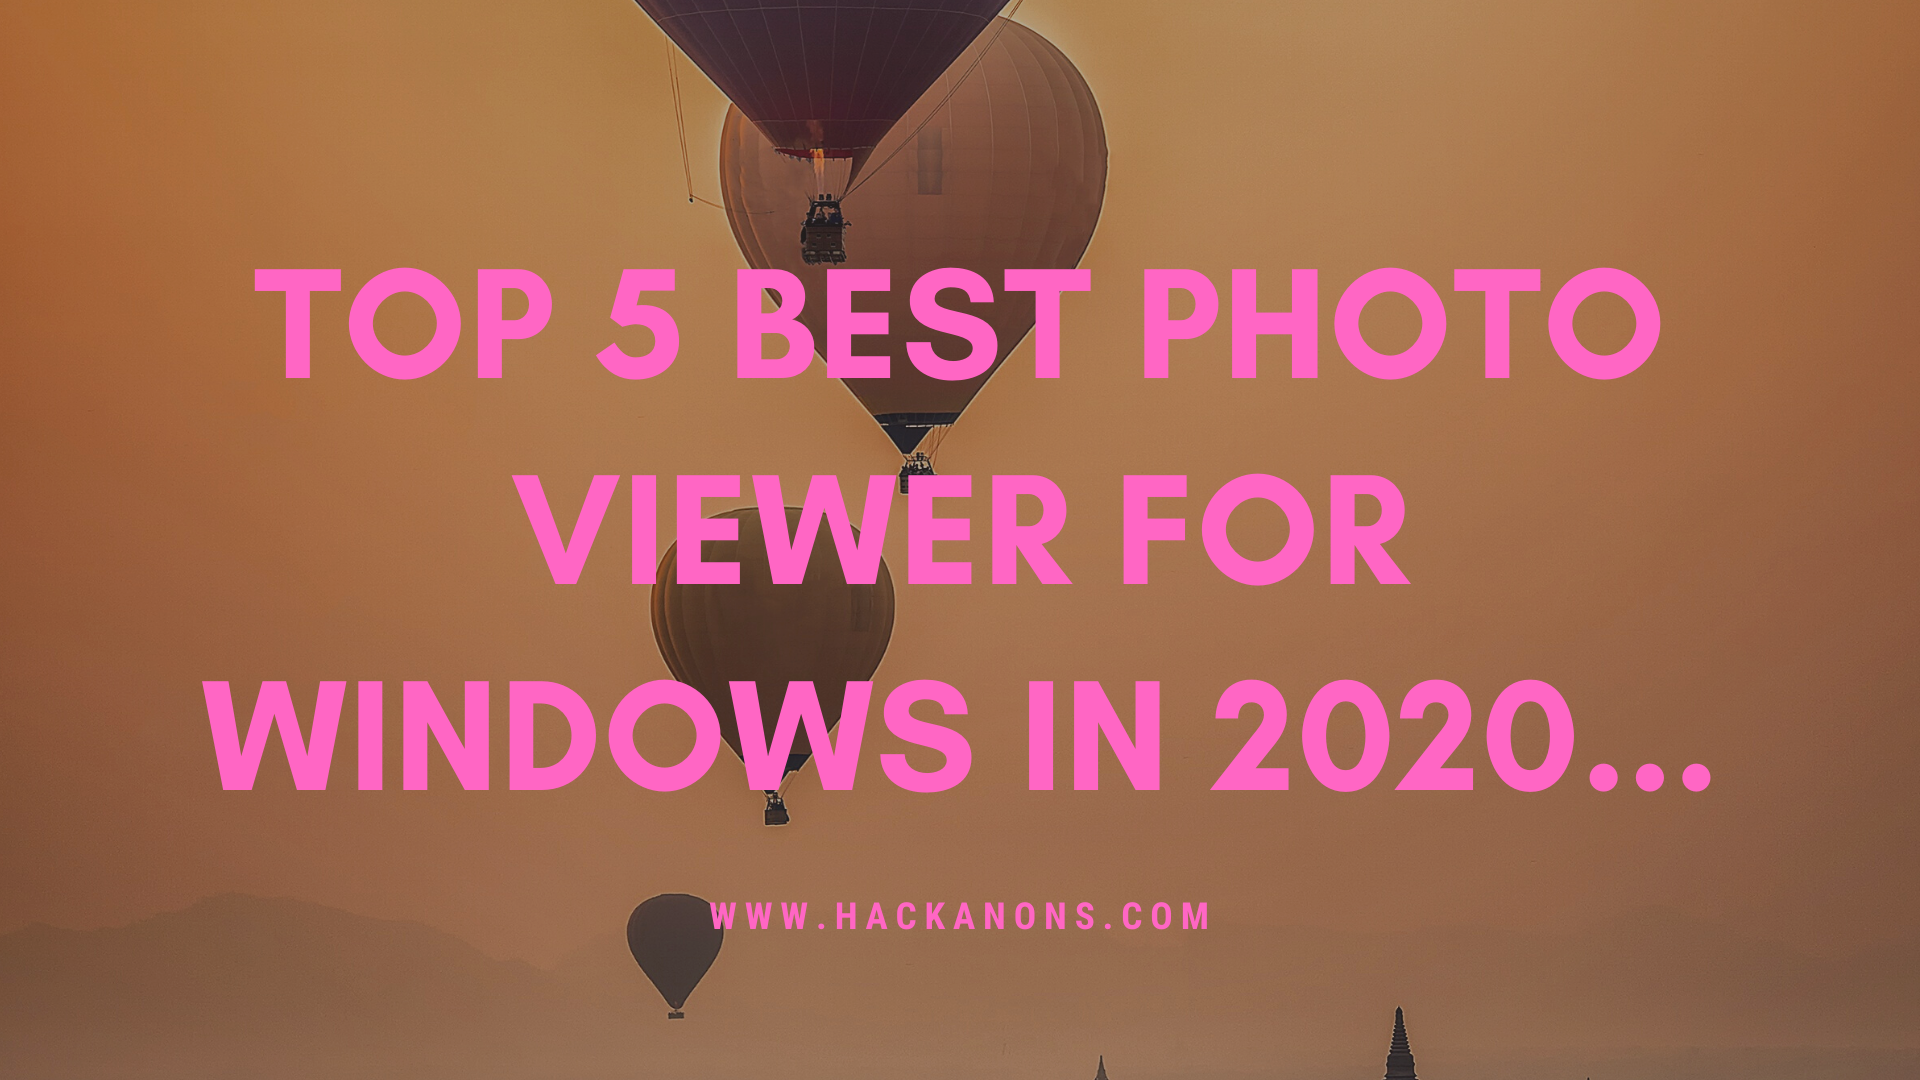 top 5 best photo viewer for windows in 2020